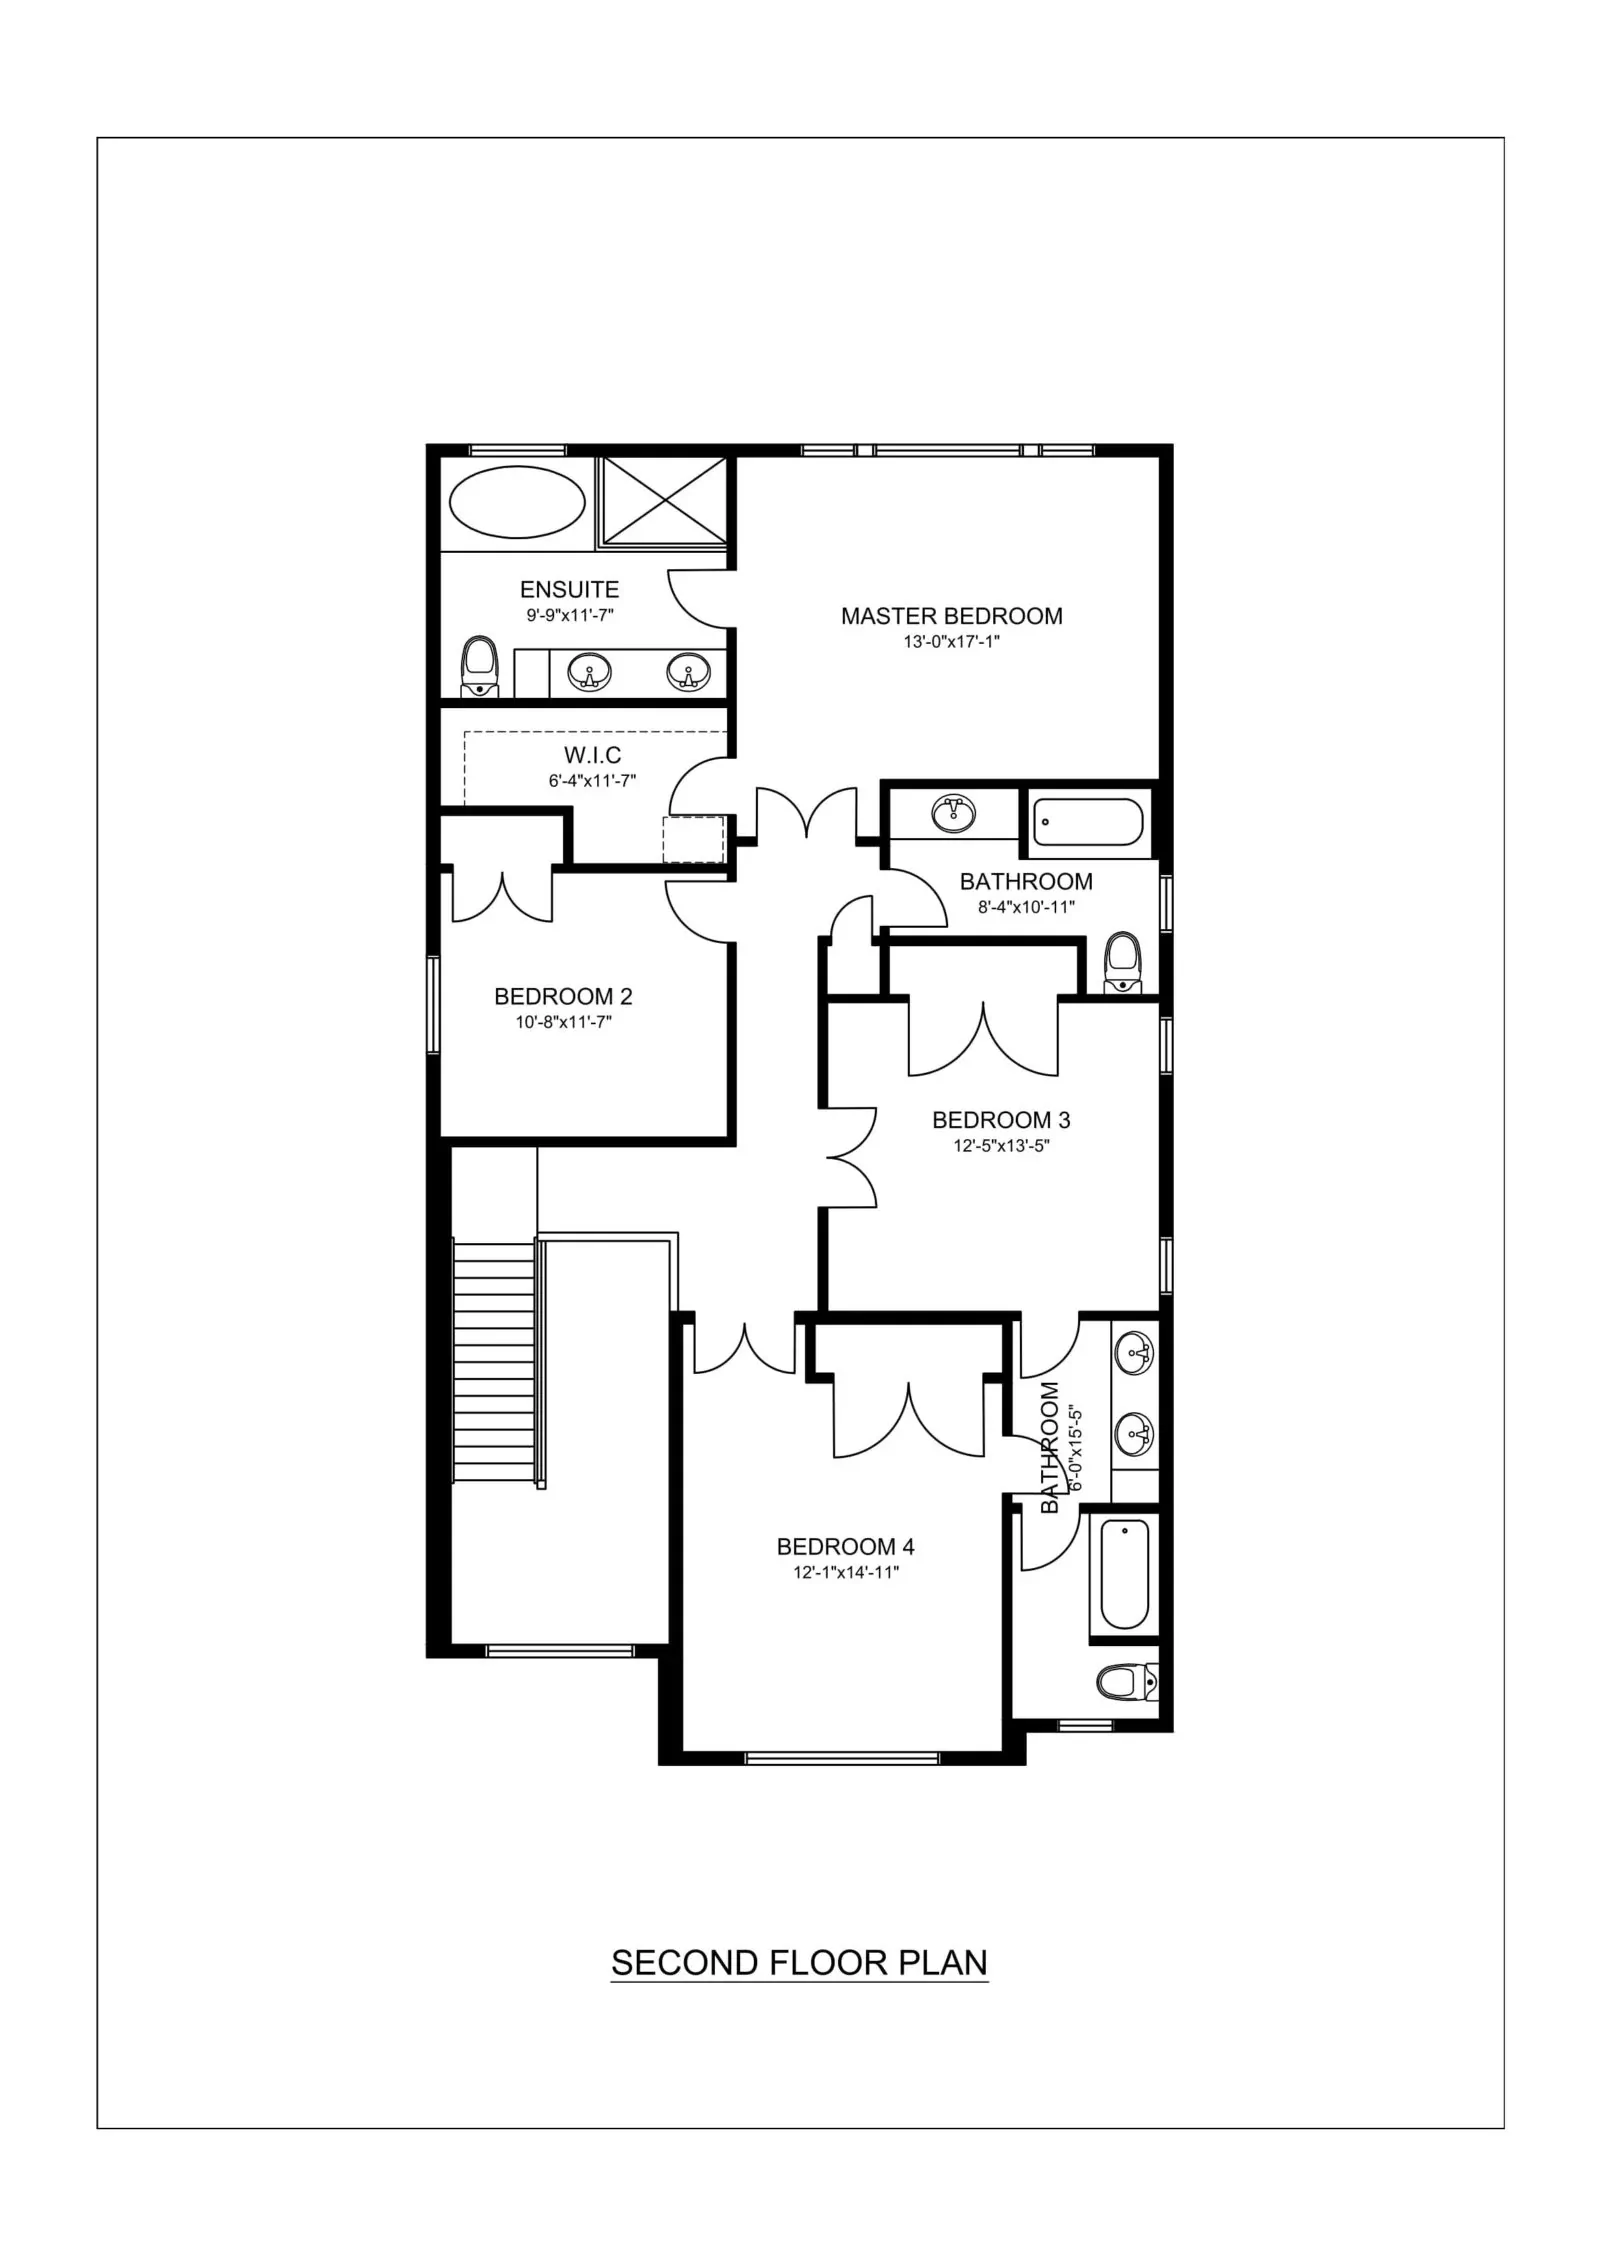 2D Floor Plan with Dimensions | Floor Plan with Dimensions